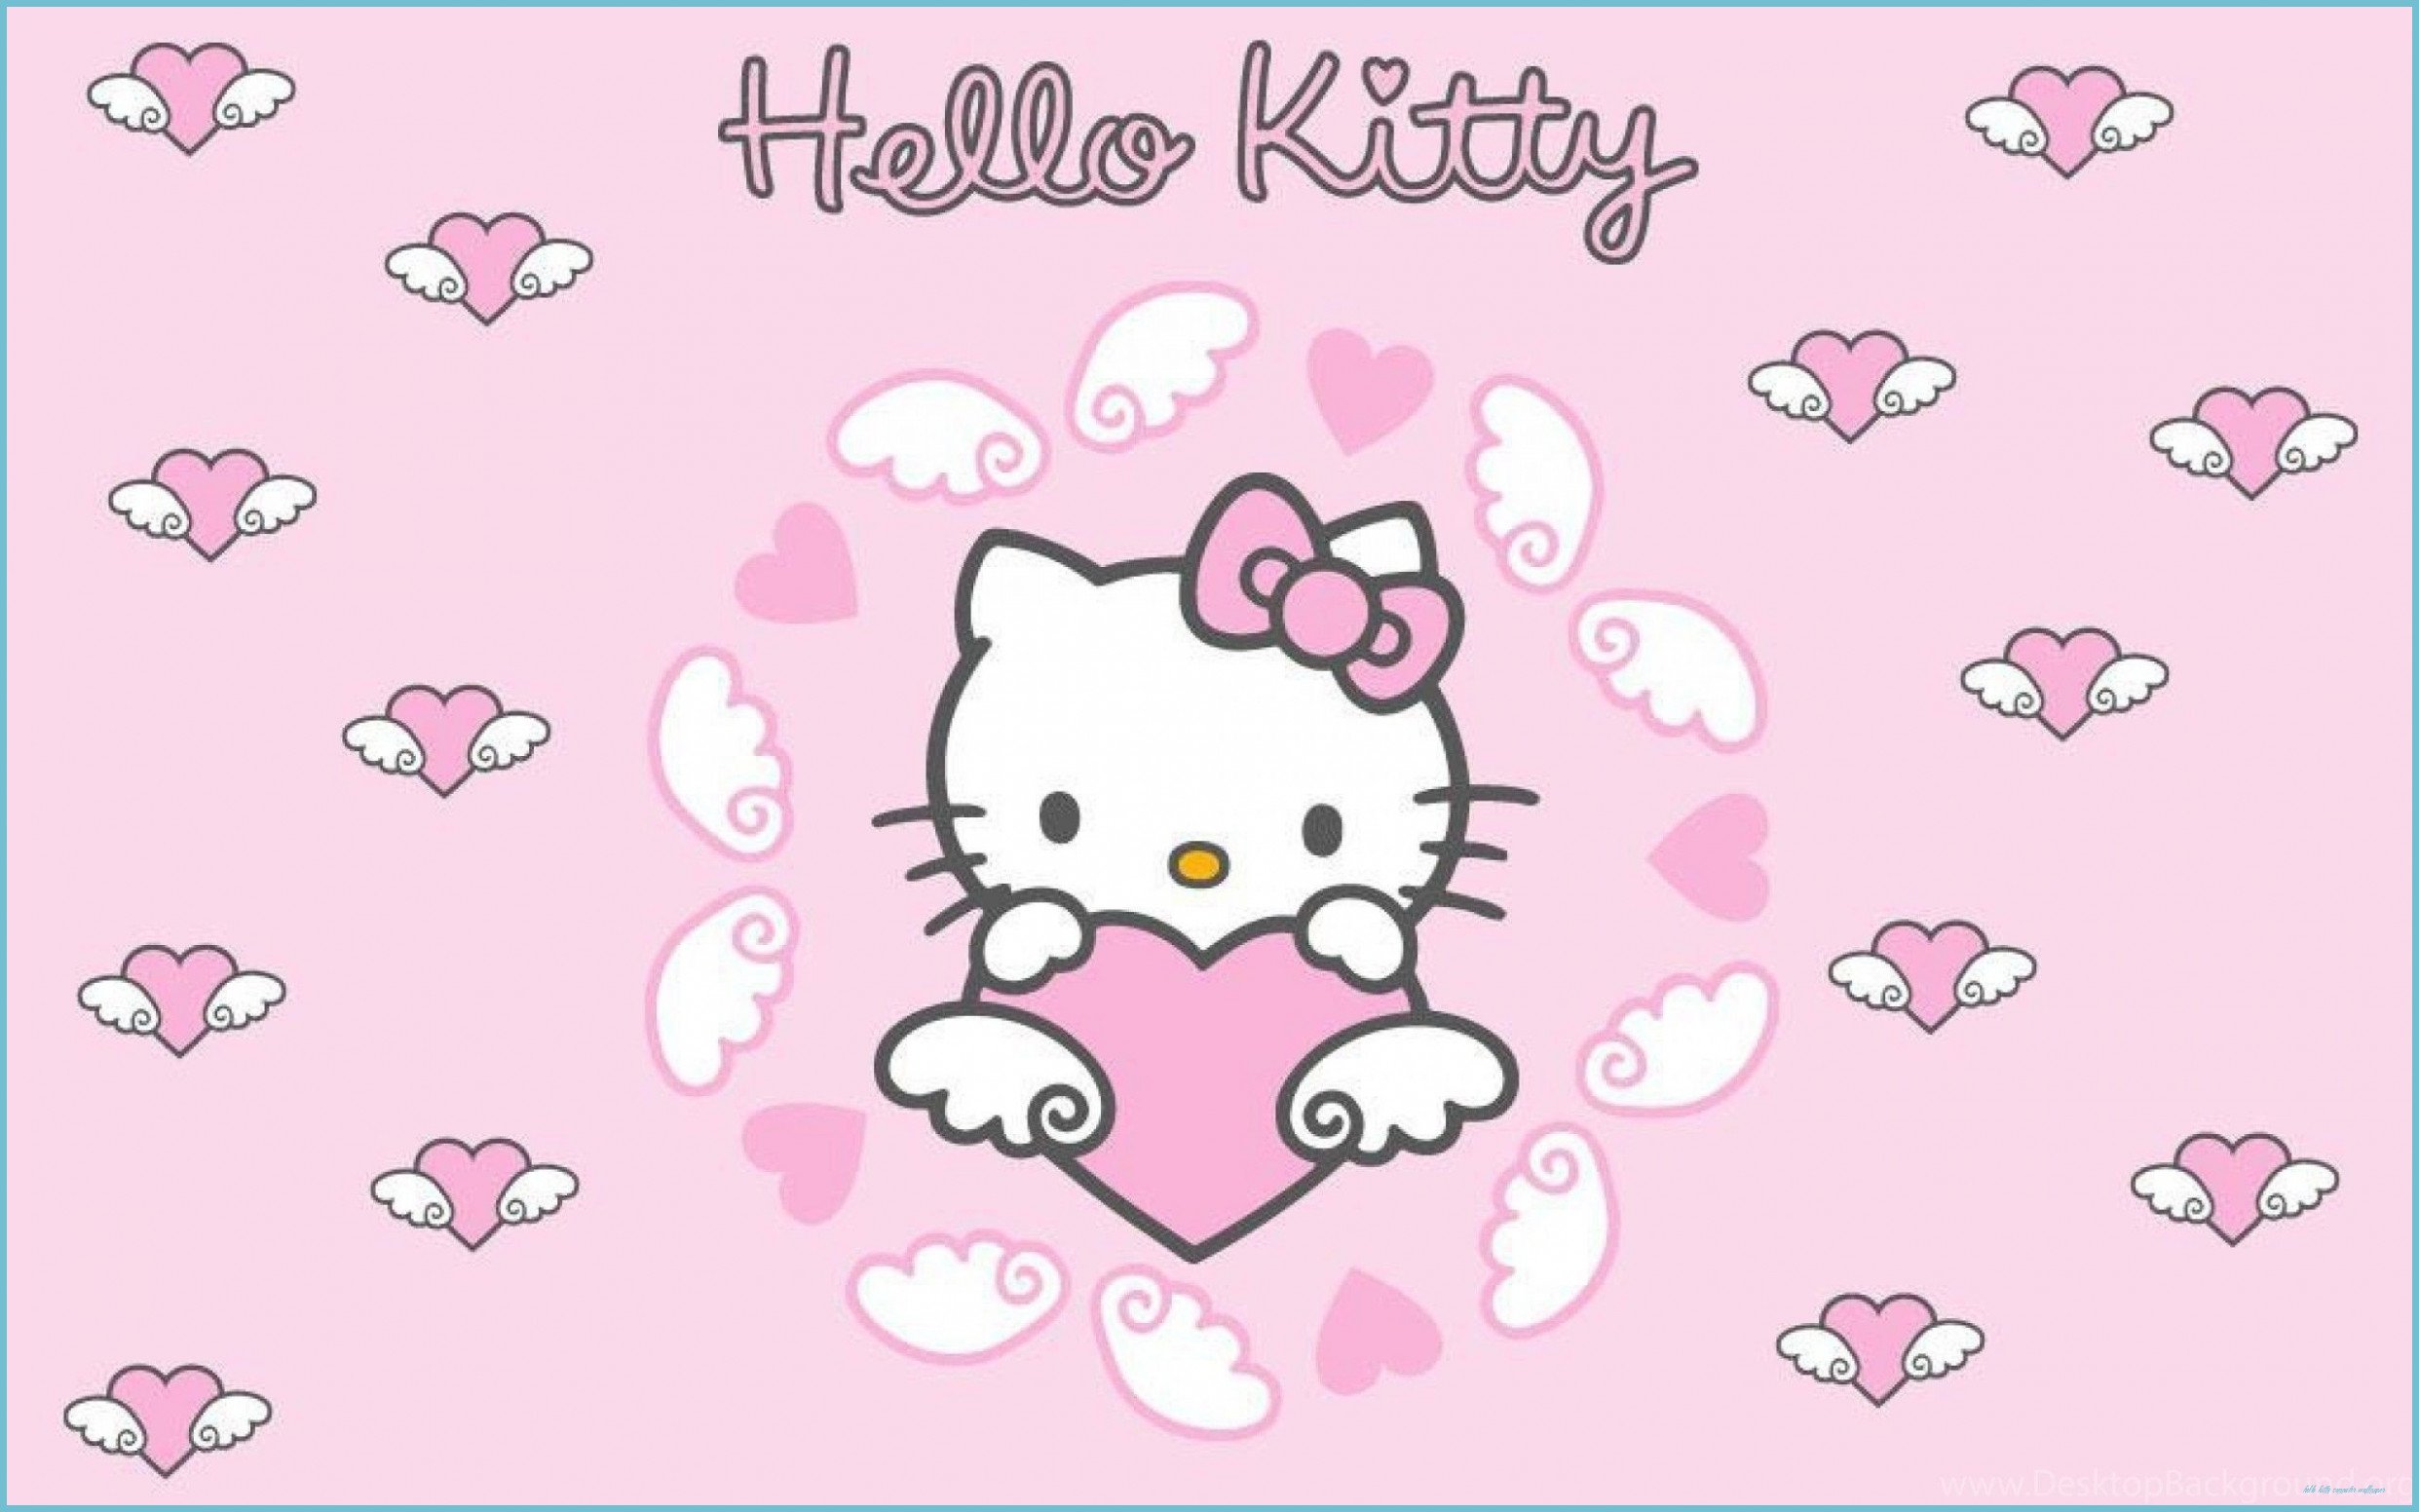 20 Cute Hello Kitty Wallpaper Ideas  Aesthetic Heart Background  Idea  Wallpapers  iPhone WallpapersColor Schemes